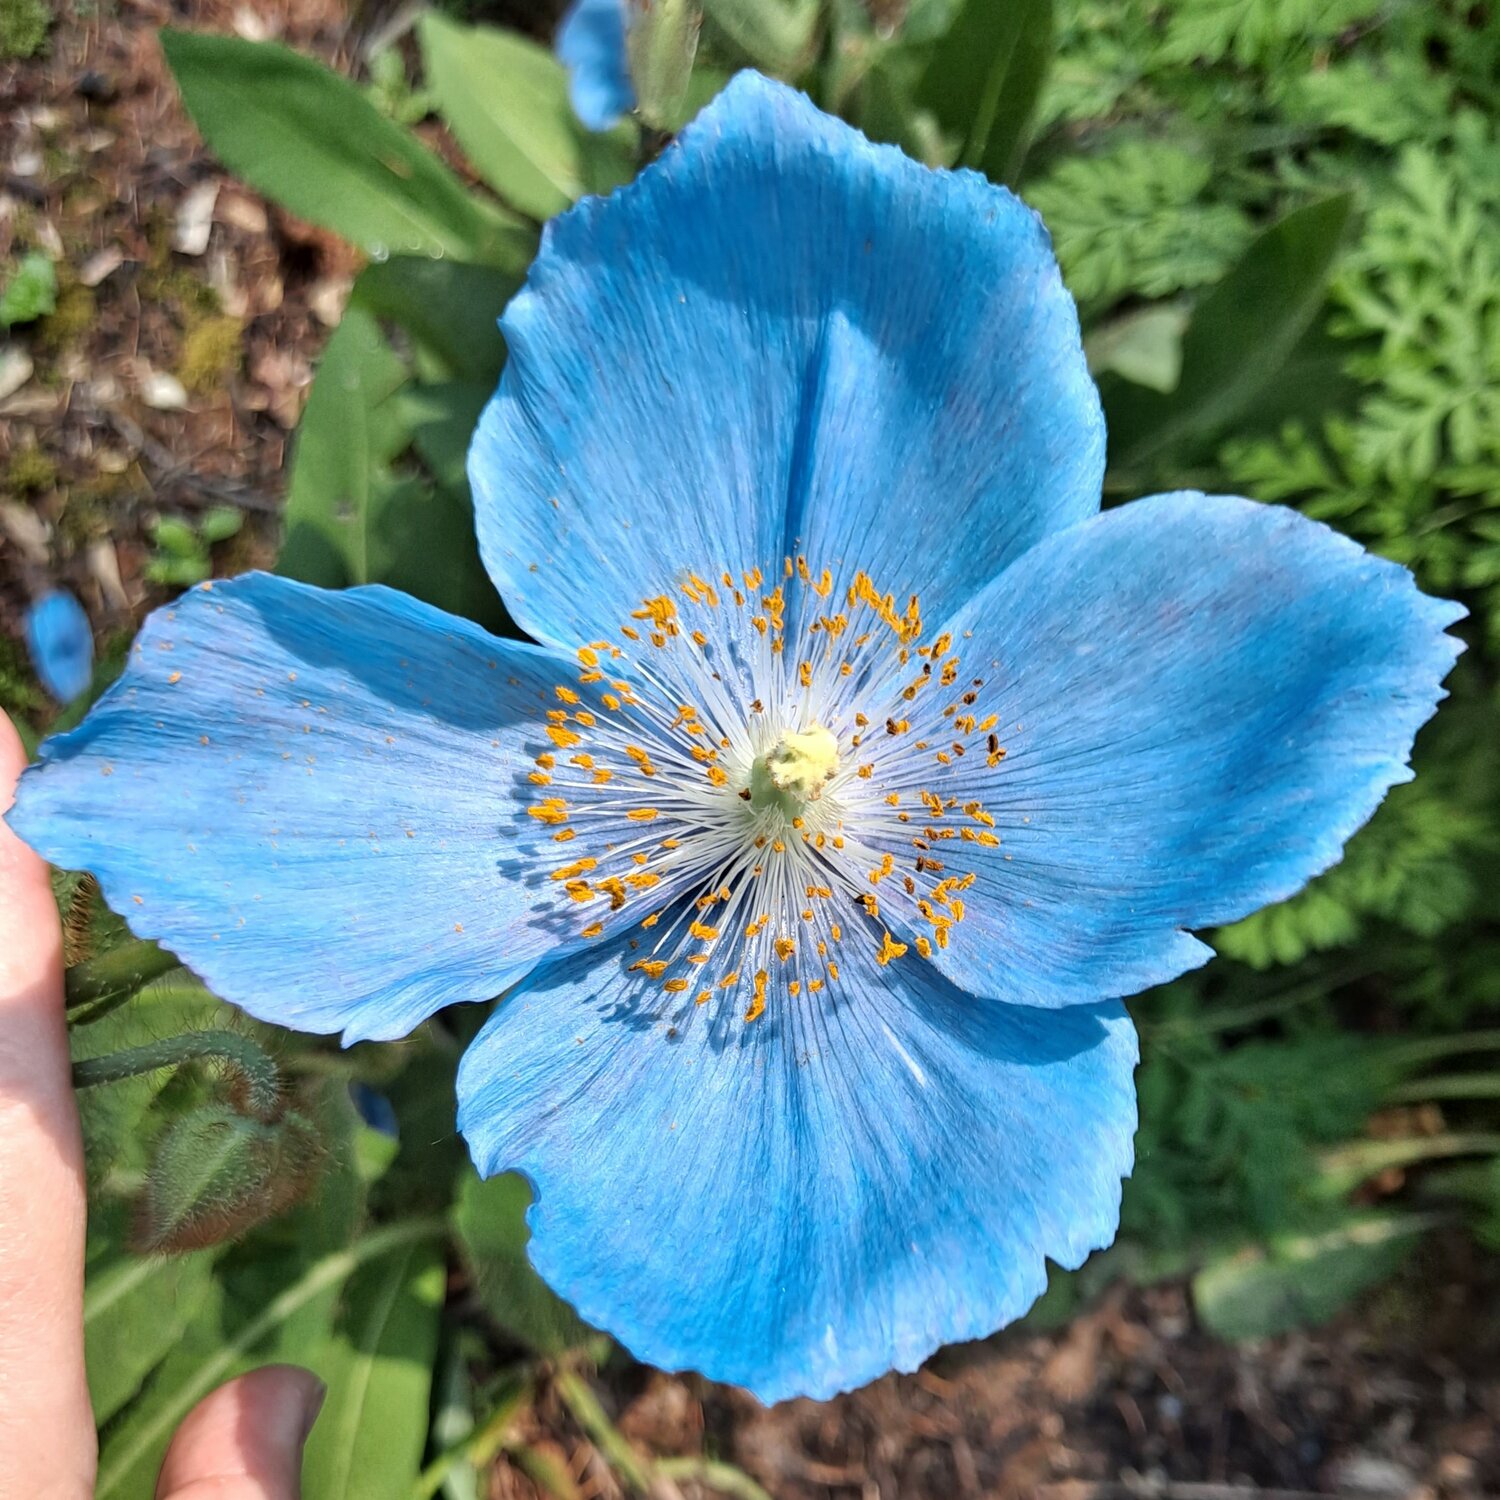 A view of a Himalayan blue poppy from above.